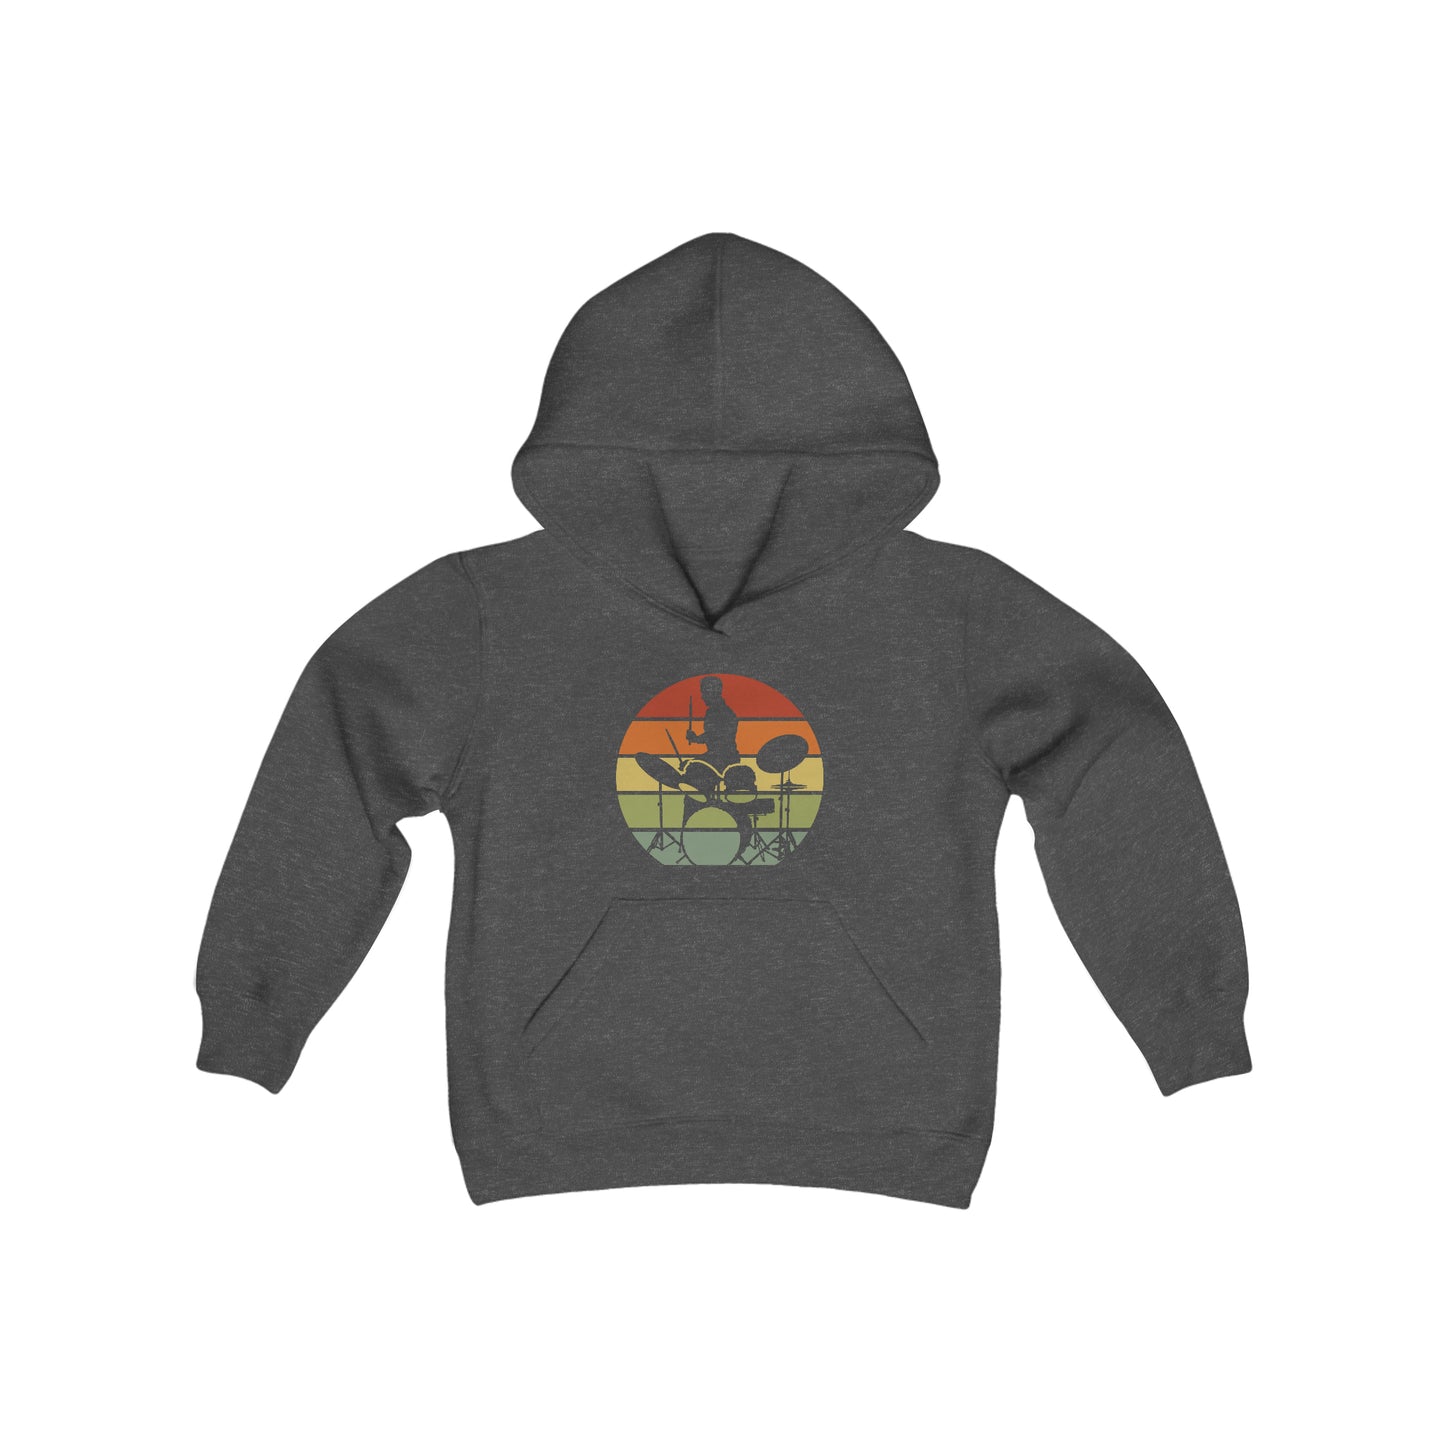 Drummer Silhouette - Retro Circle Stripes Faded - Youth Heavy Blend Hooded Sweatshirt